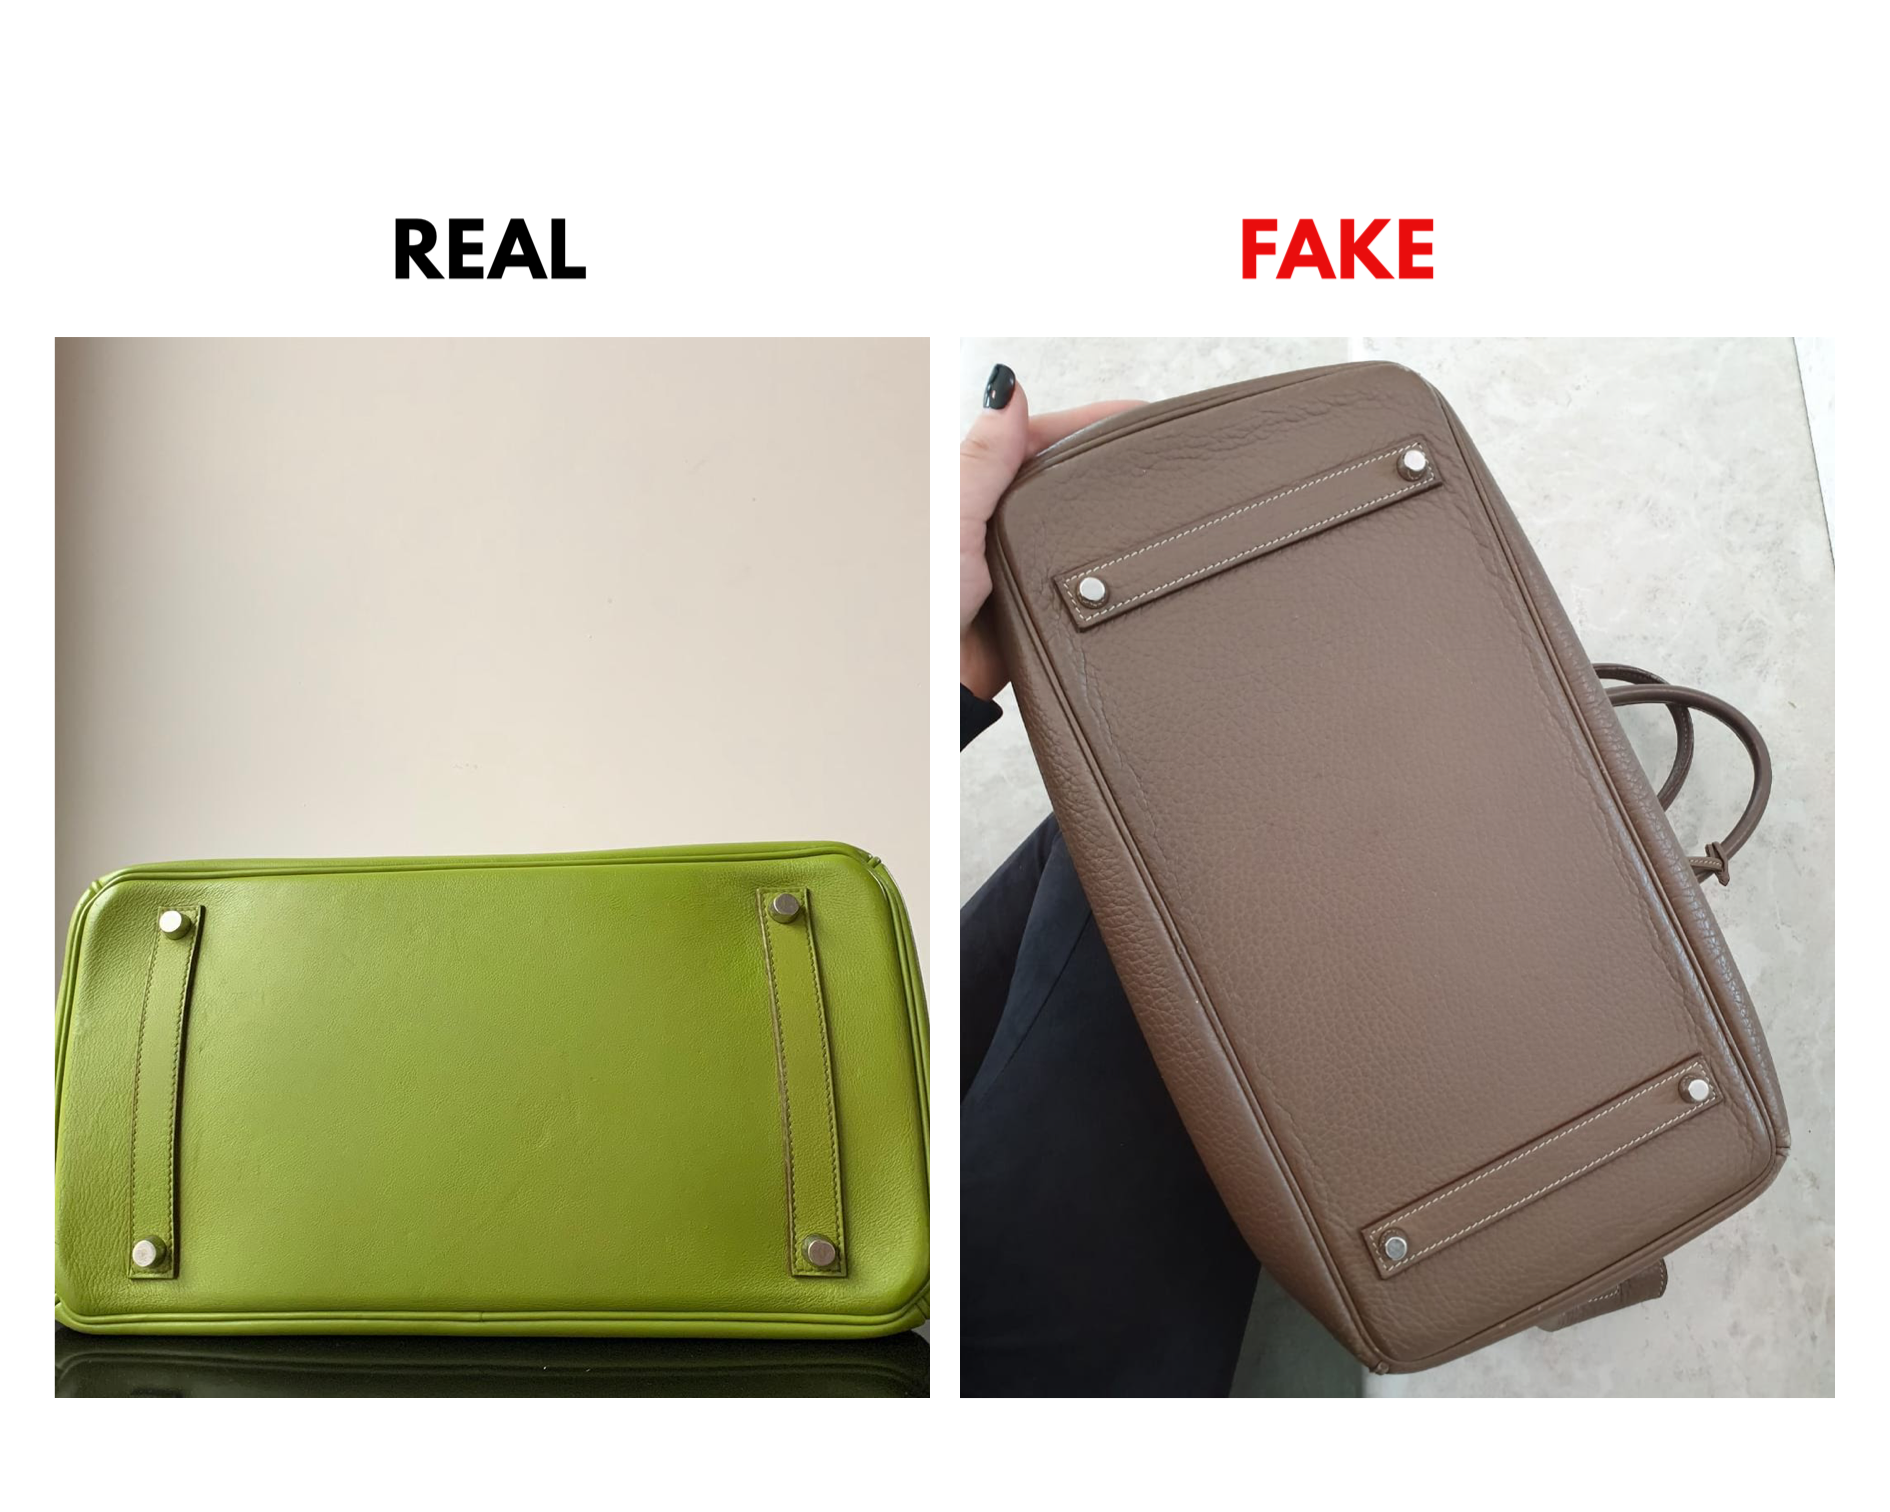 Fake vs. Real Hermes Birkin 35 :) How to Protect your Hard Earned Money 